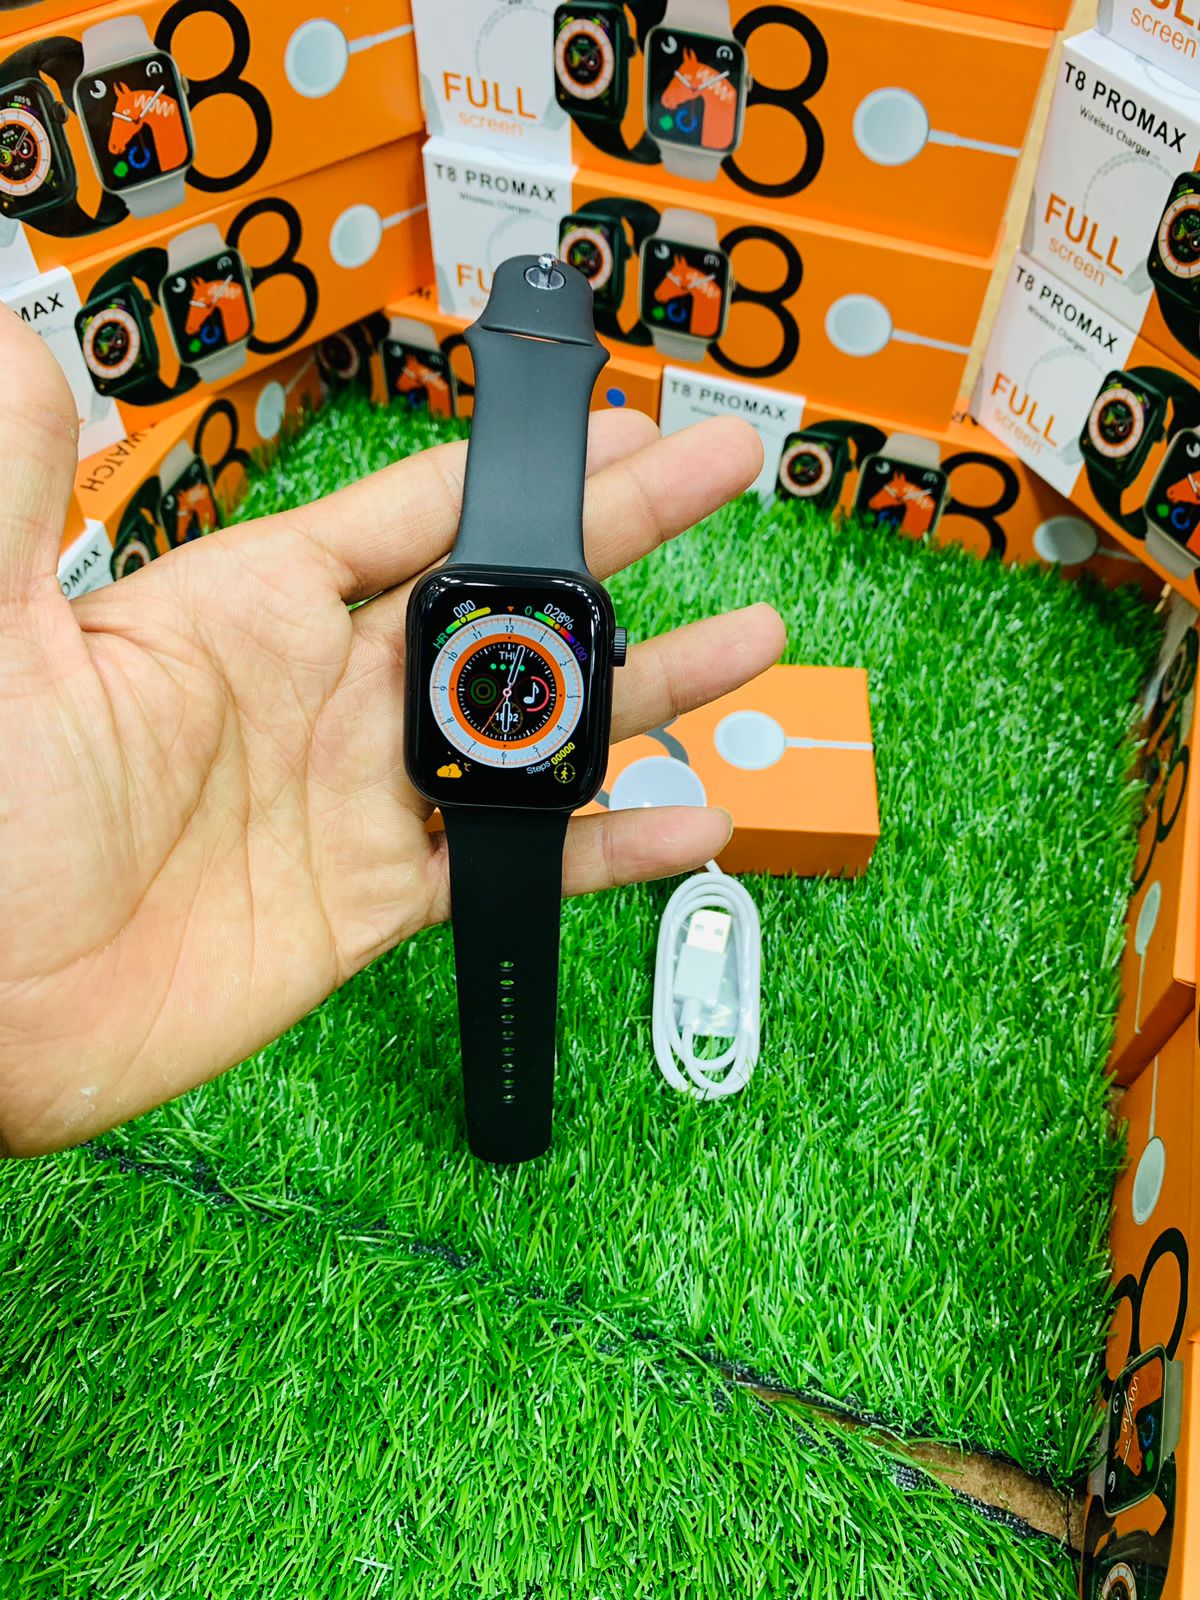 T8 PRO Max Series 8 Smart Watch With ALWAYS ON DISPLAY